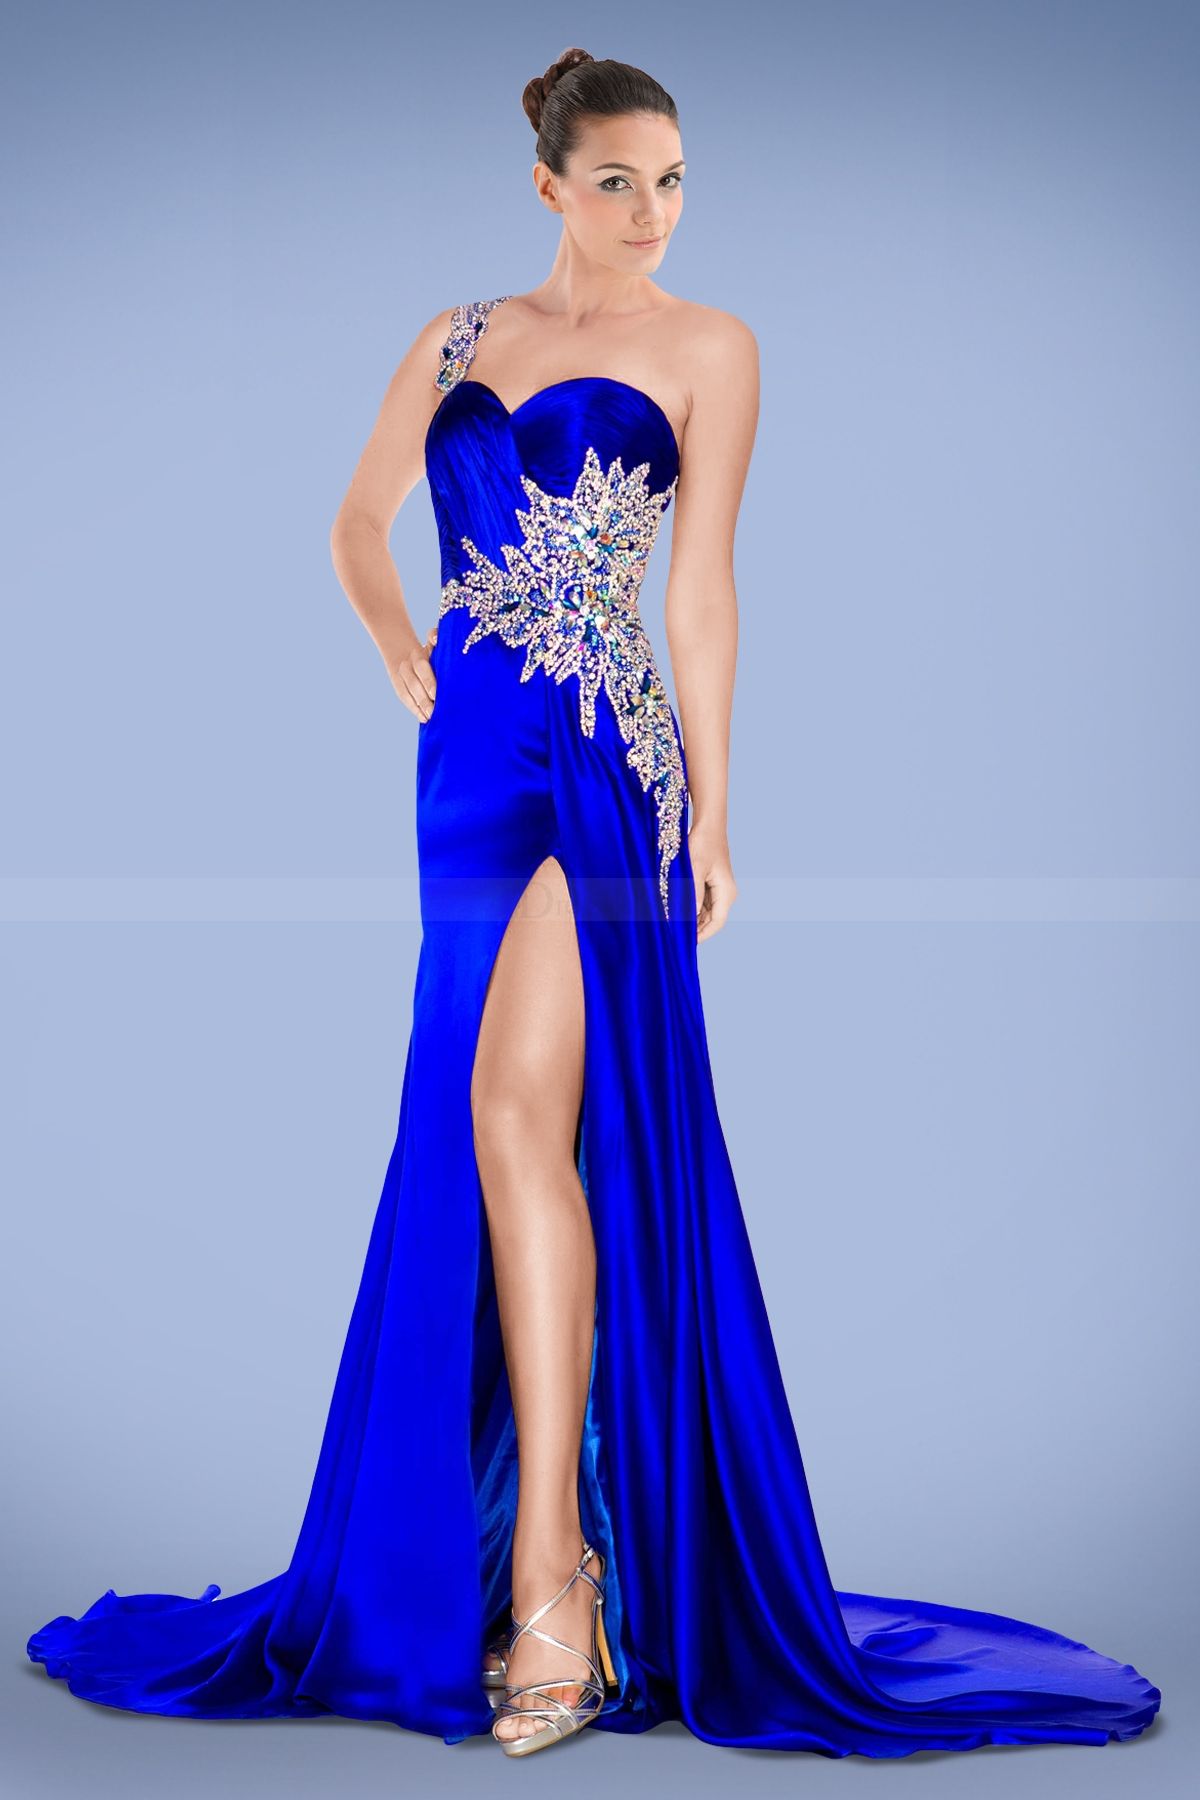 Compelling One-shoulder Royal Blue Prom Dress with Crystals and Split